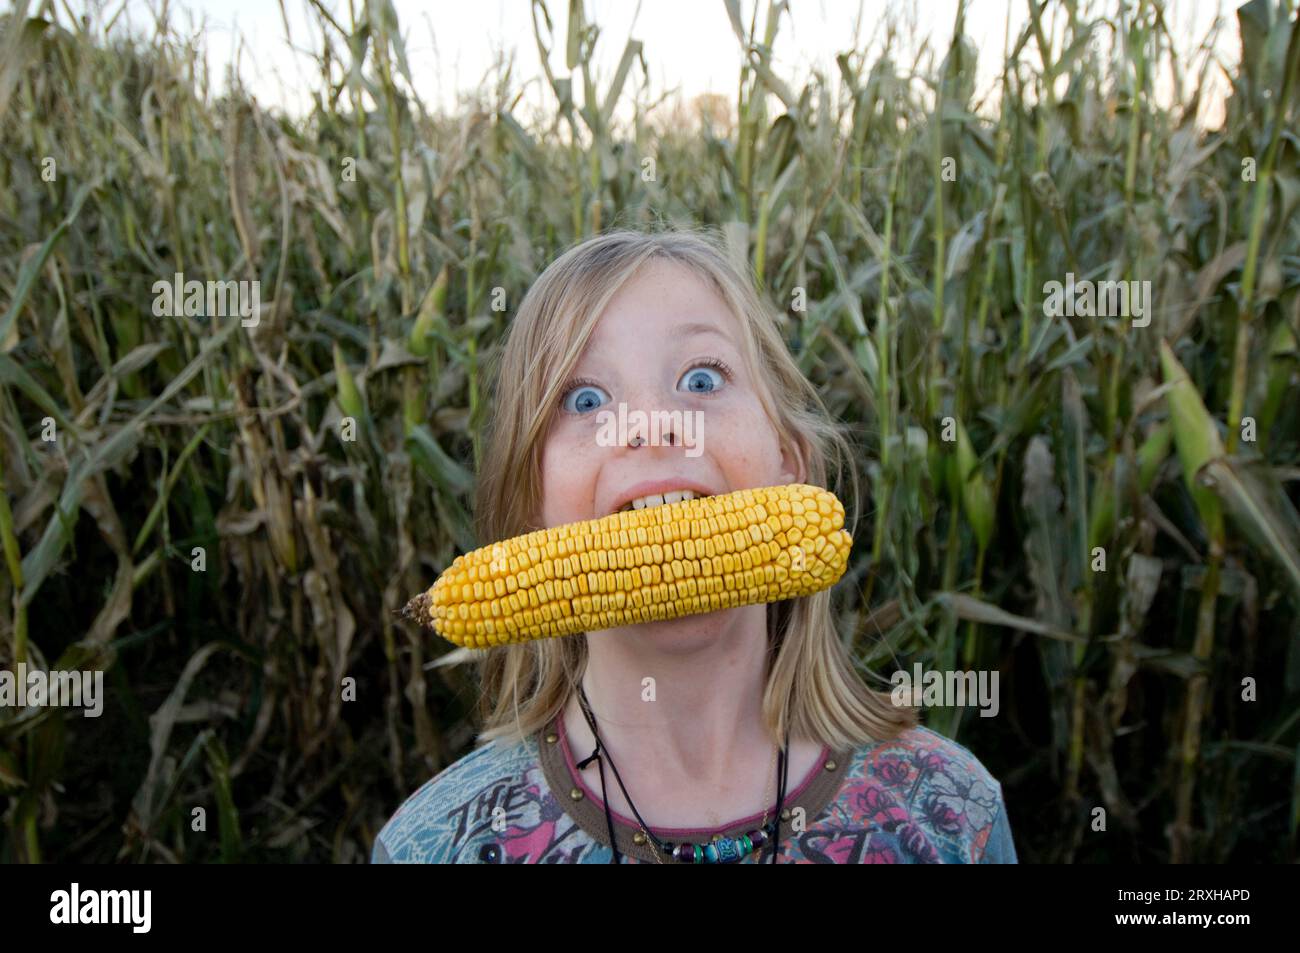 Young girl with wide blue eyes holds a cob of corn in her mouth in a cornfield; Roca, Nebraska, United States of America Stock Photo